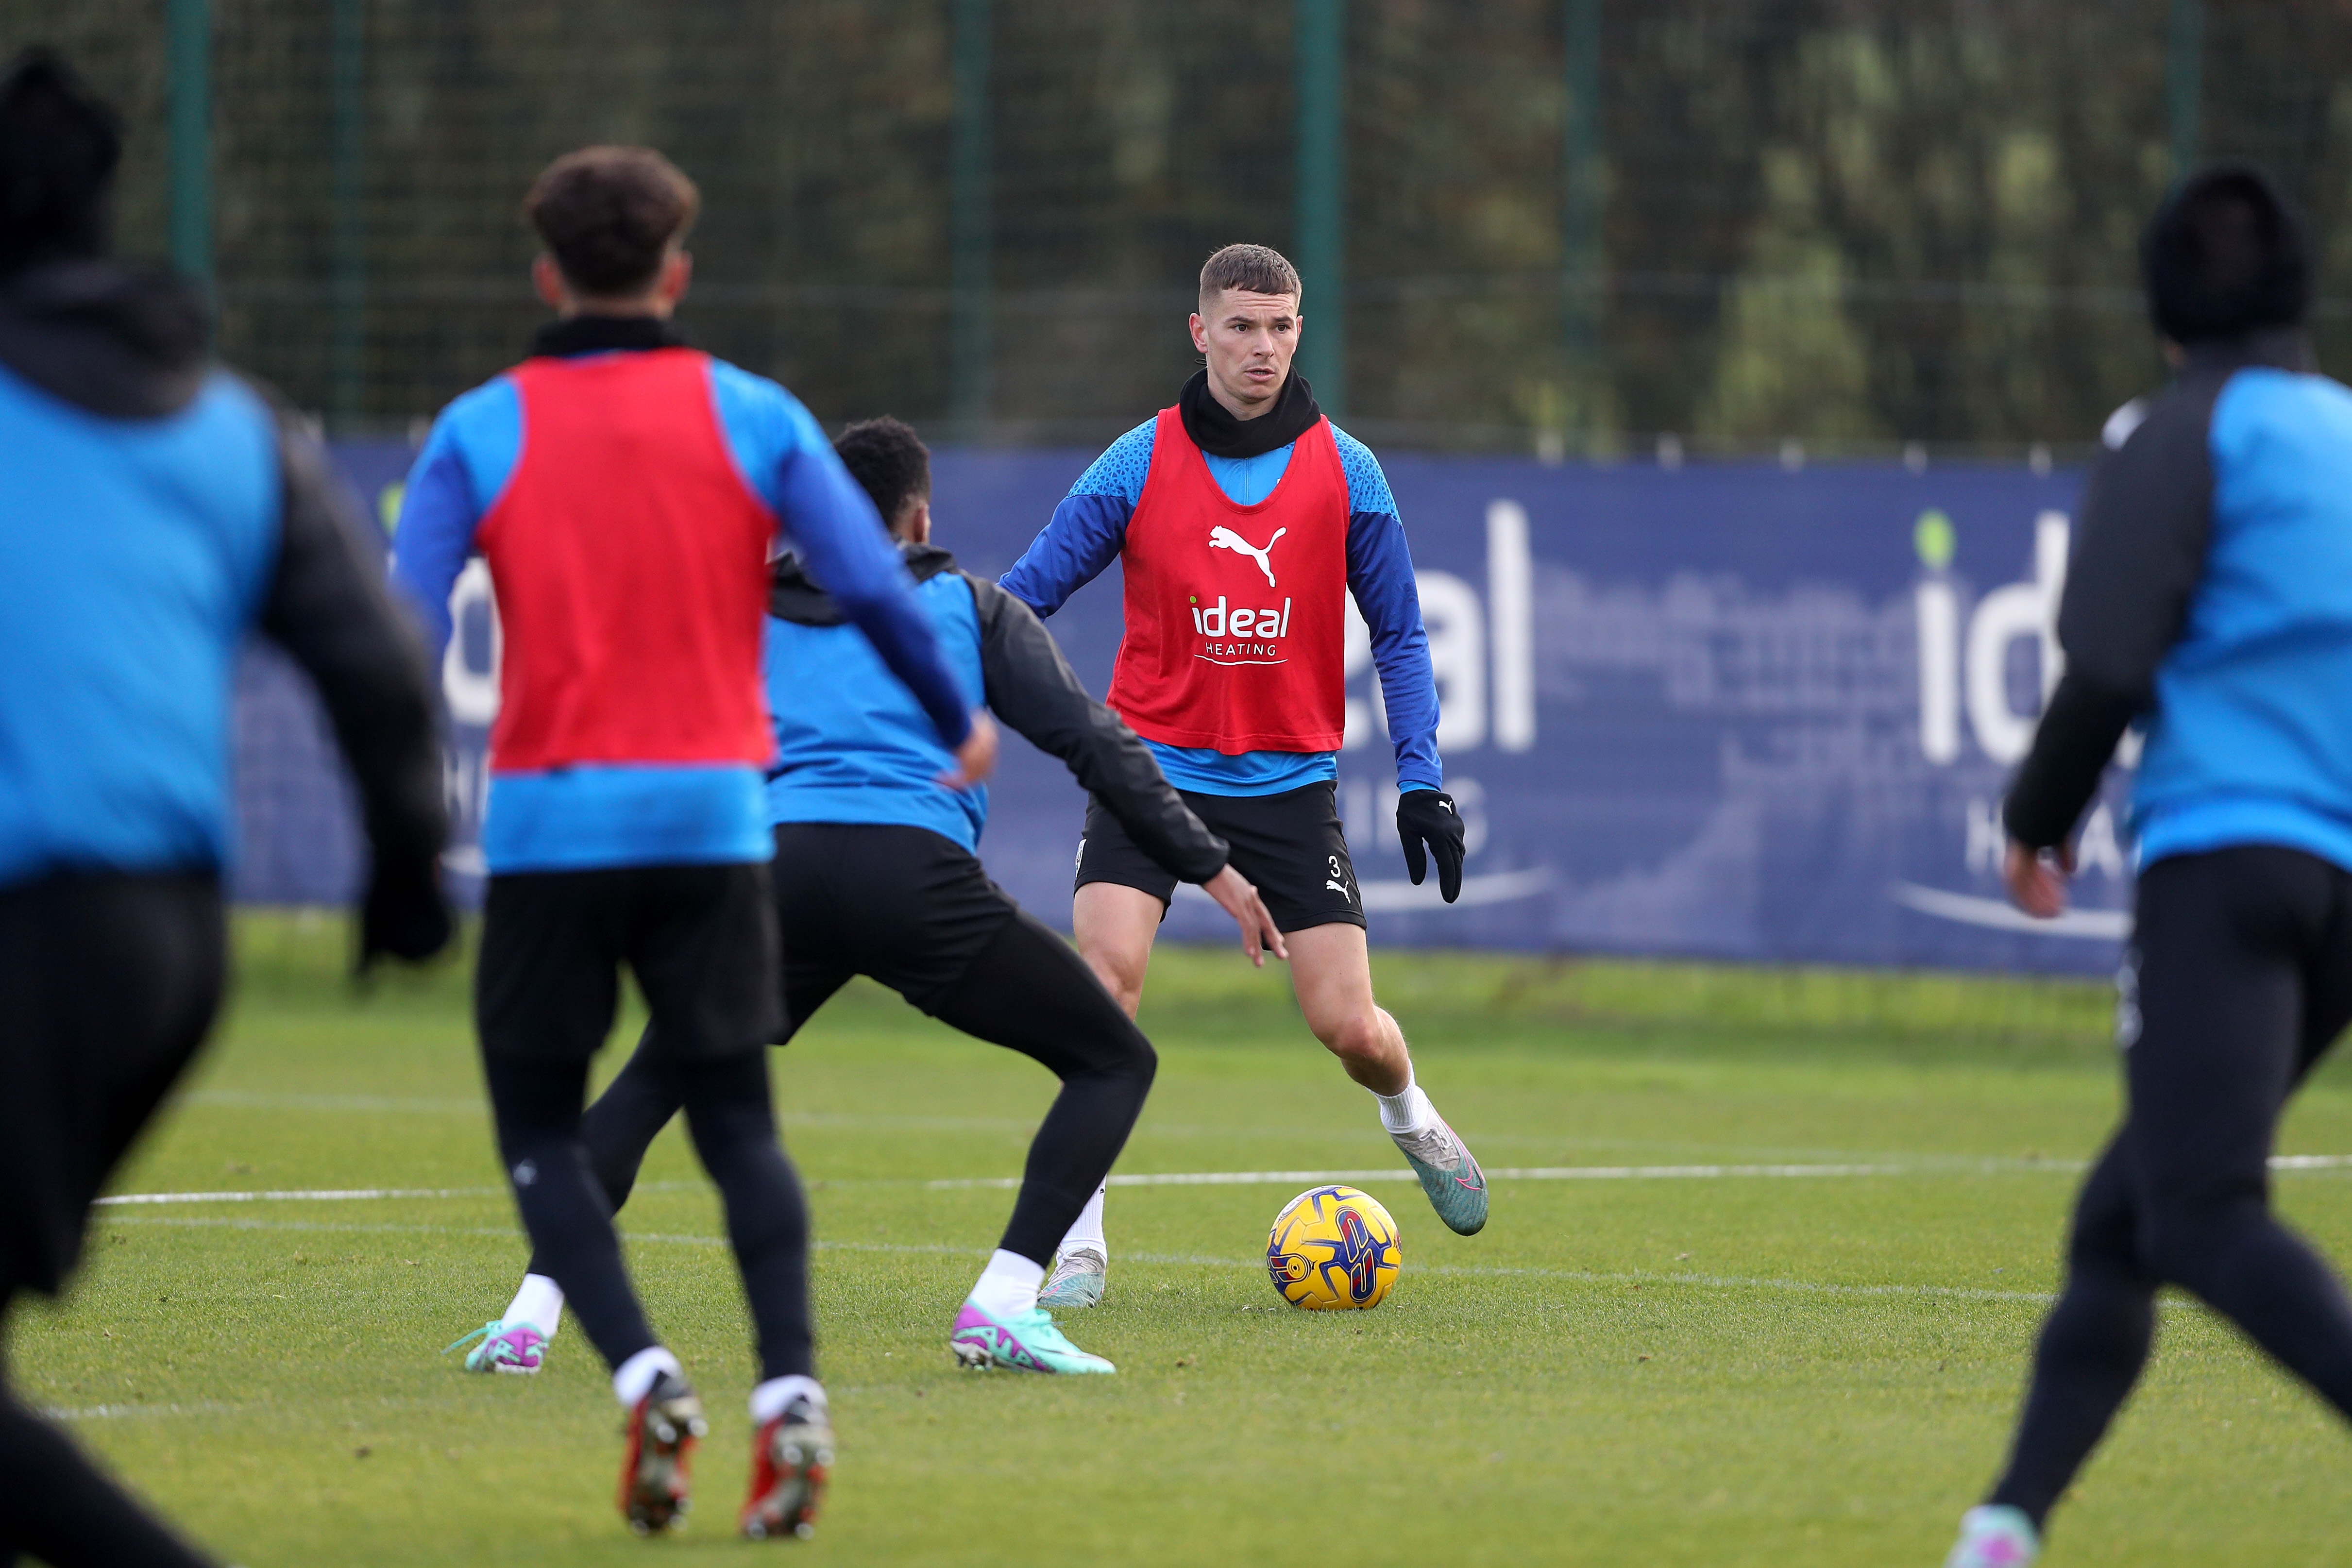 Conor Townsend on the ball in training while wearing a red bib